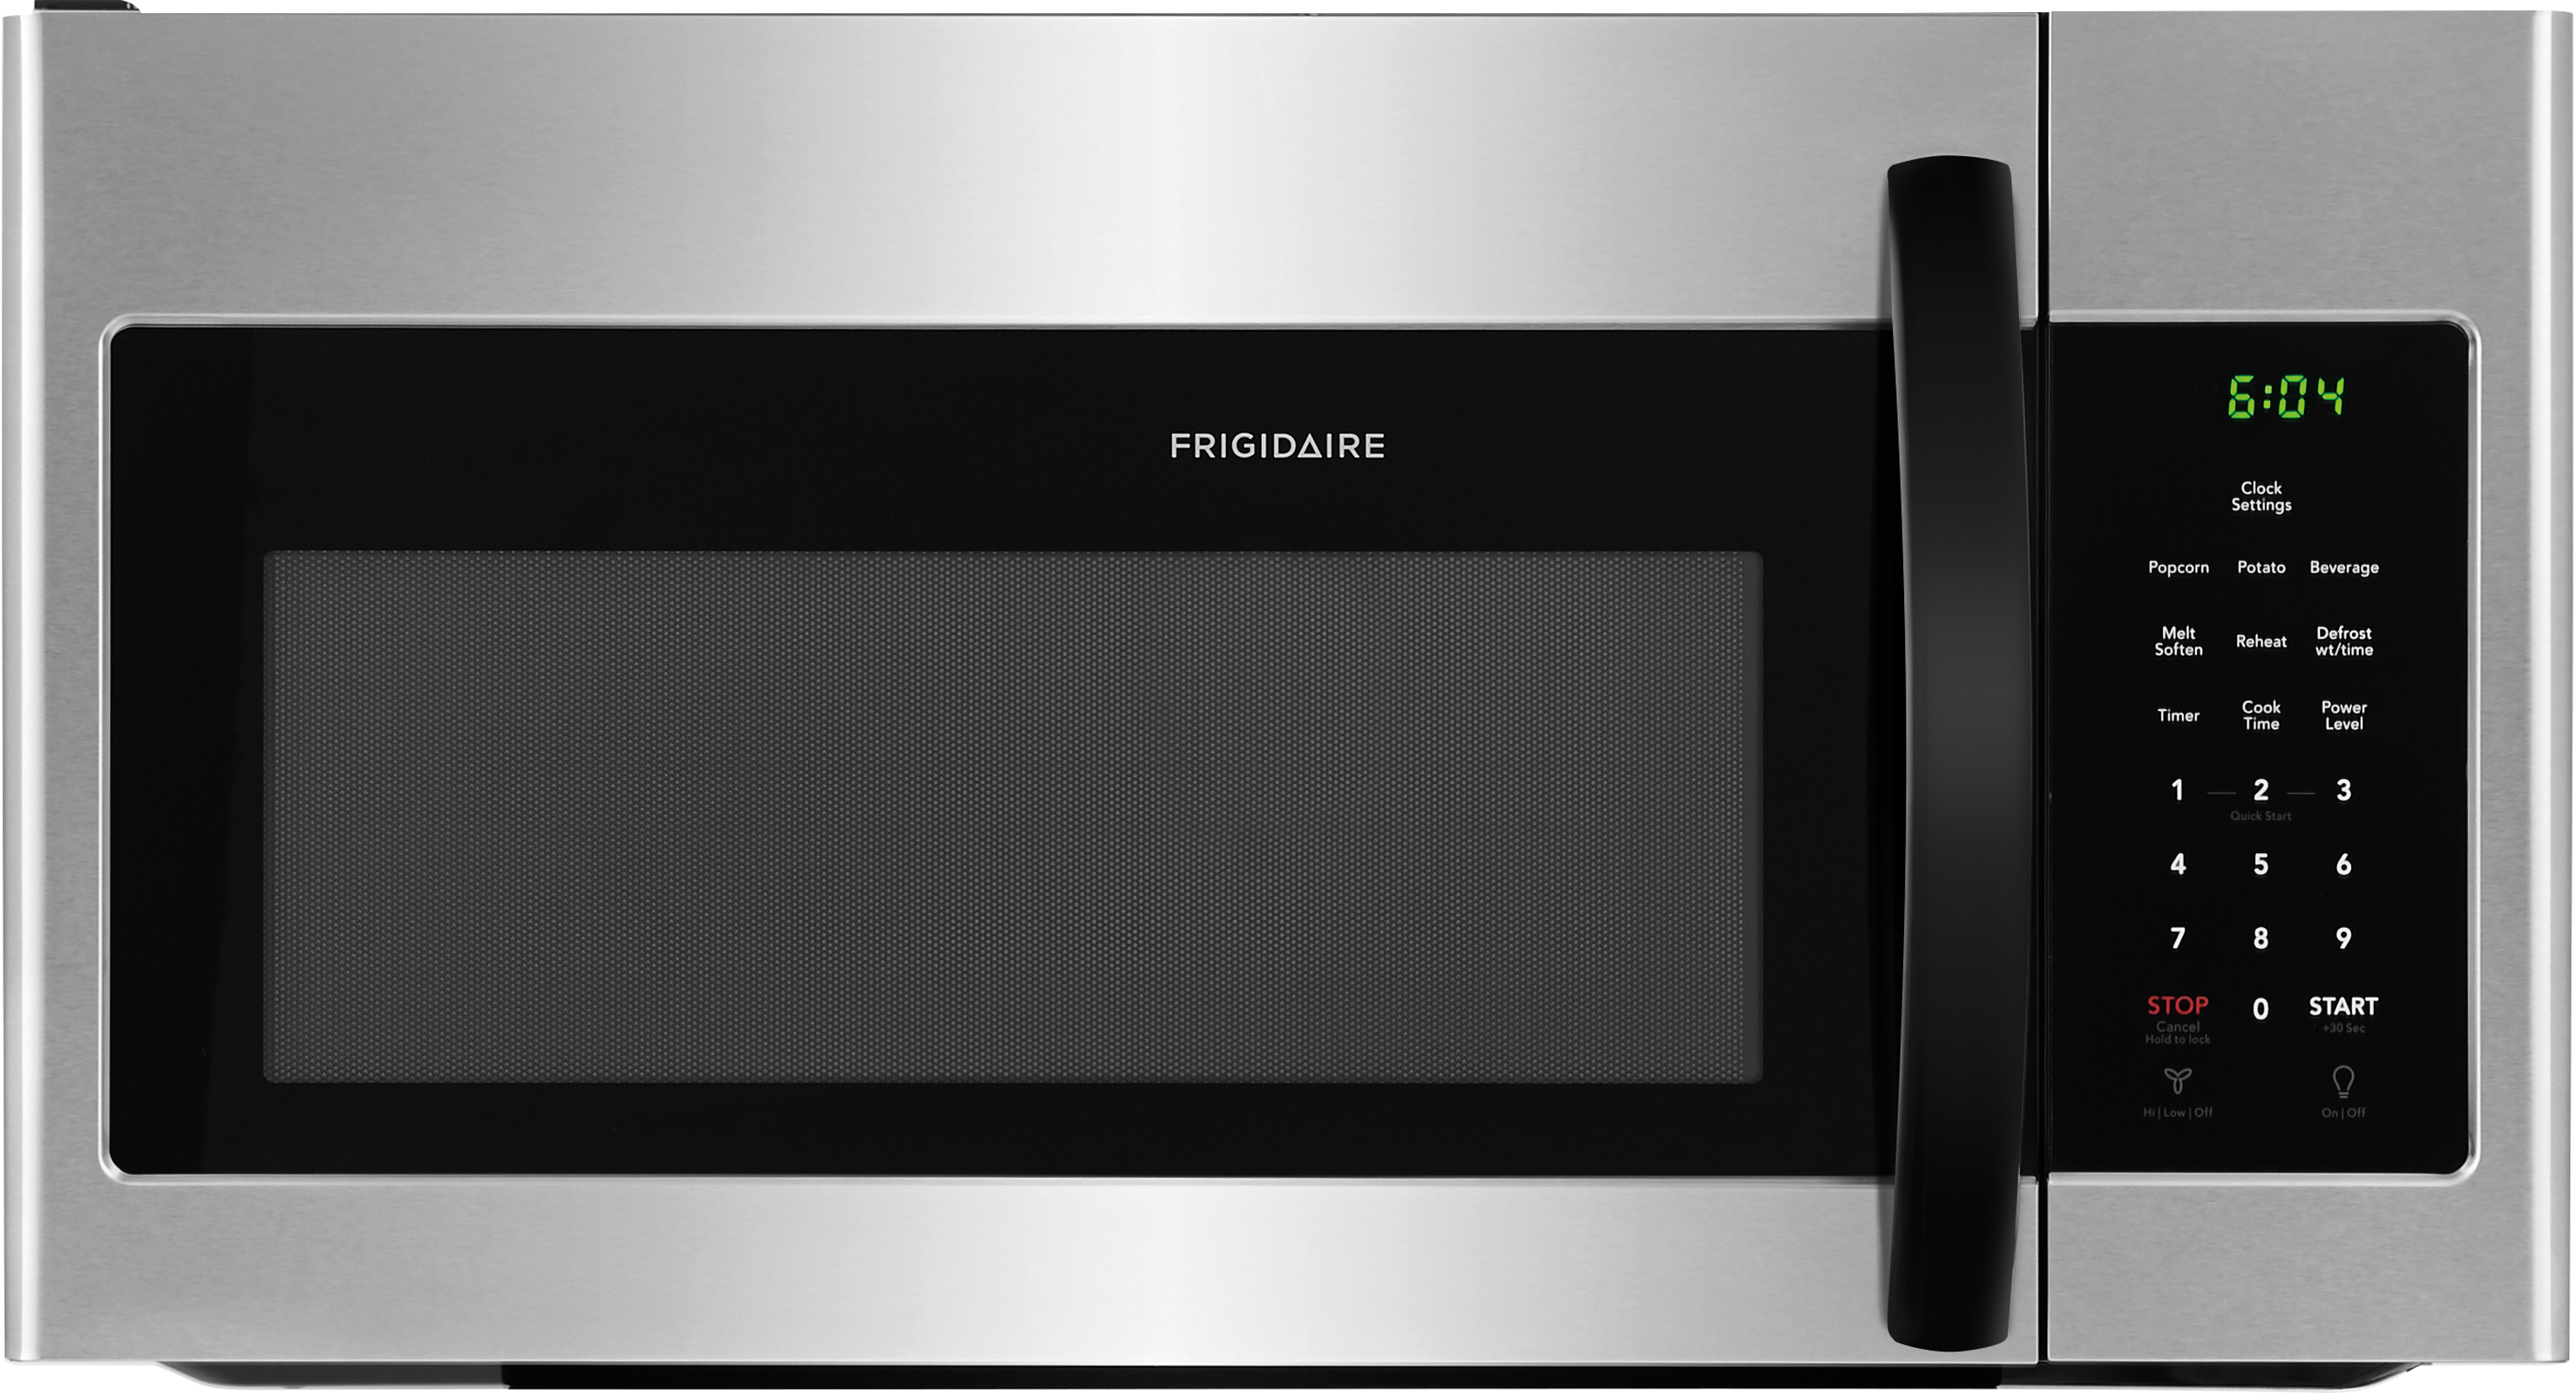 Frigidaire FFMV1645TH 1.6 cu. ft. Over-The-Range Microwave - Stainless